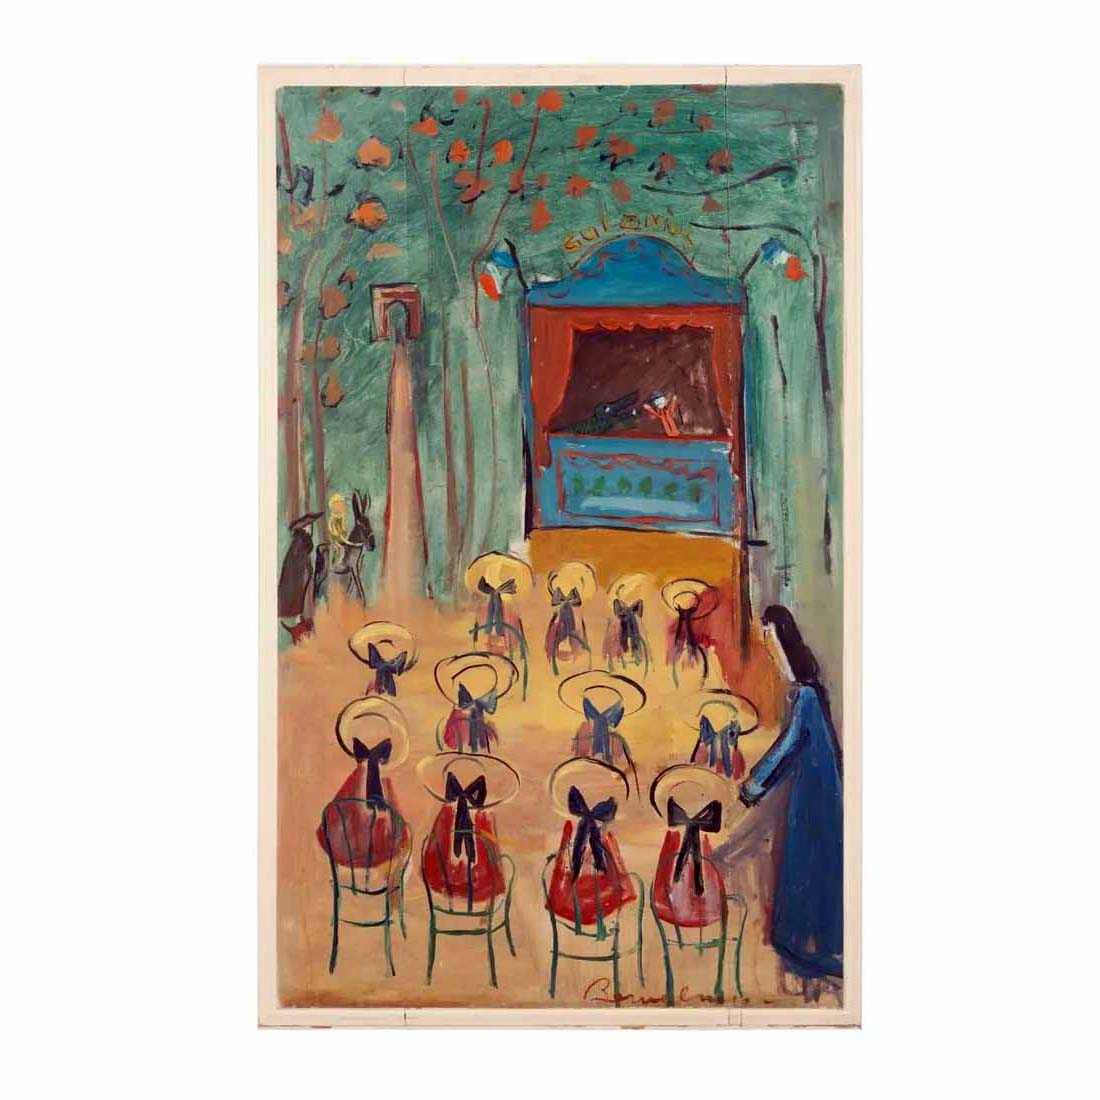 Ludwig Bemelmans, 'Puppet Show', estimated at $15,000-$25,000 at Ahlers & Ogletree.